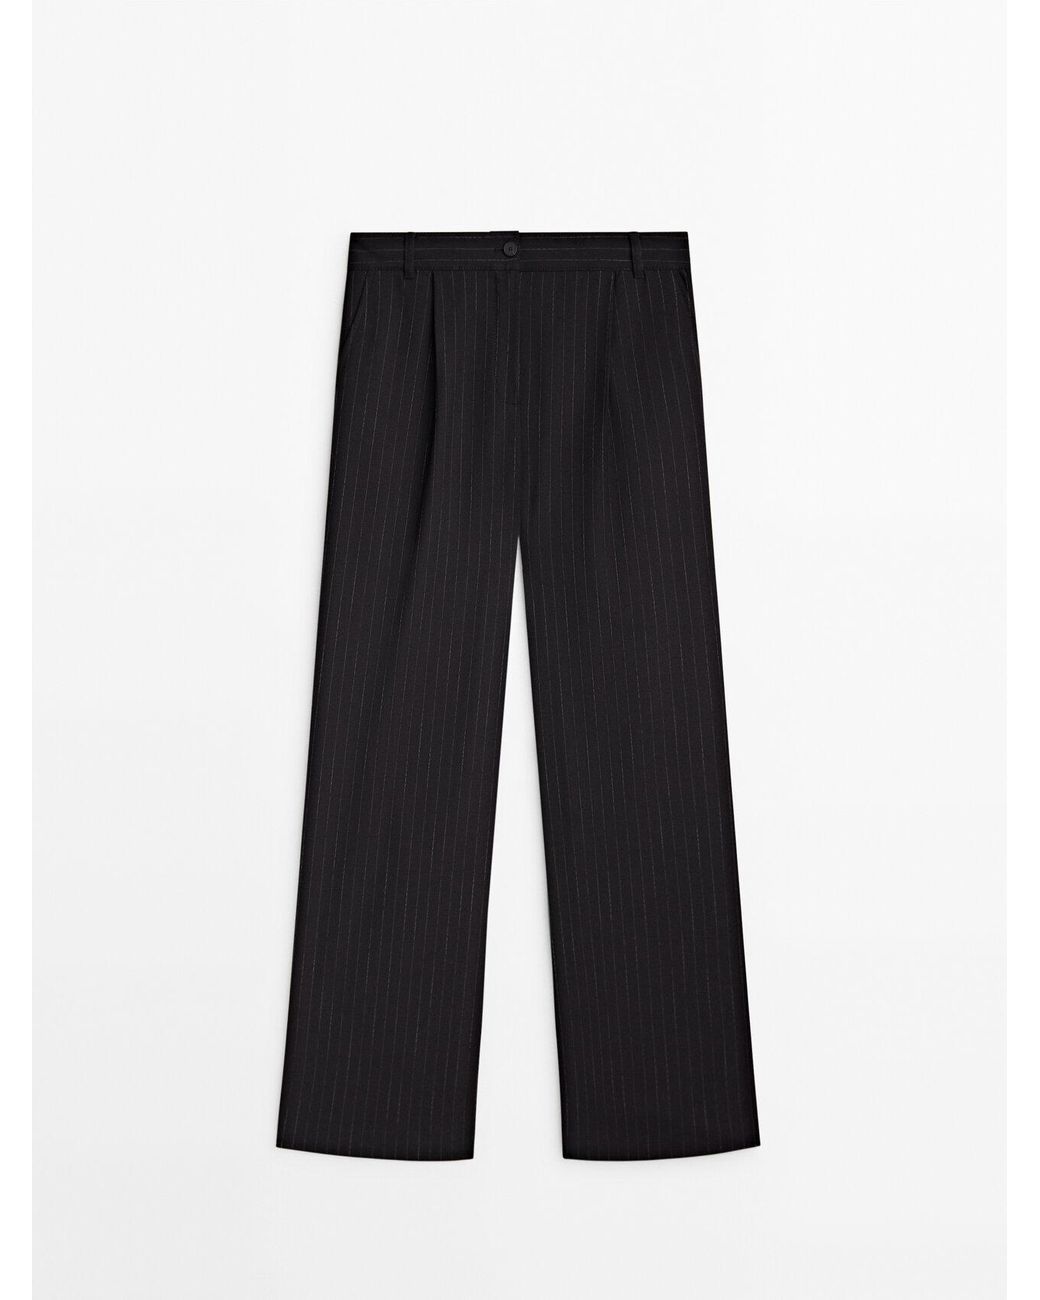 MASSIMO DUTTI Dashed Stripe Suit Trousers in Black | Lyst